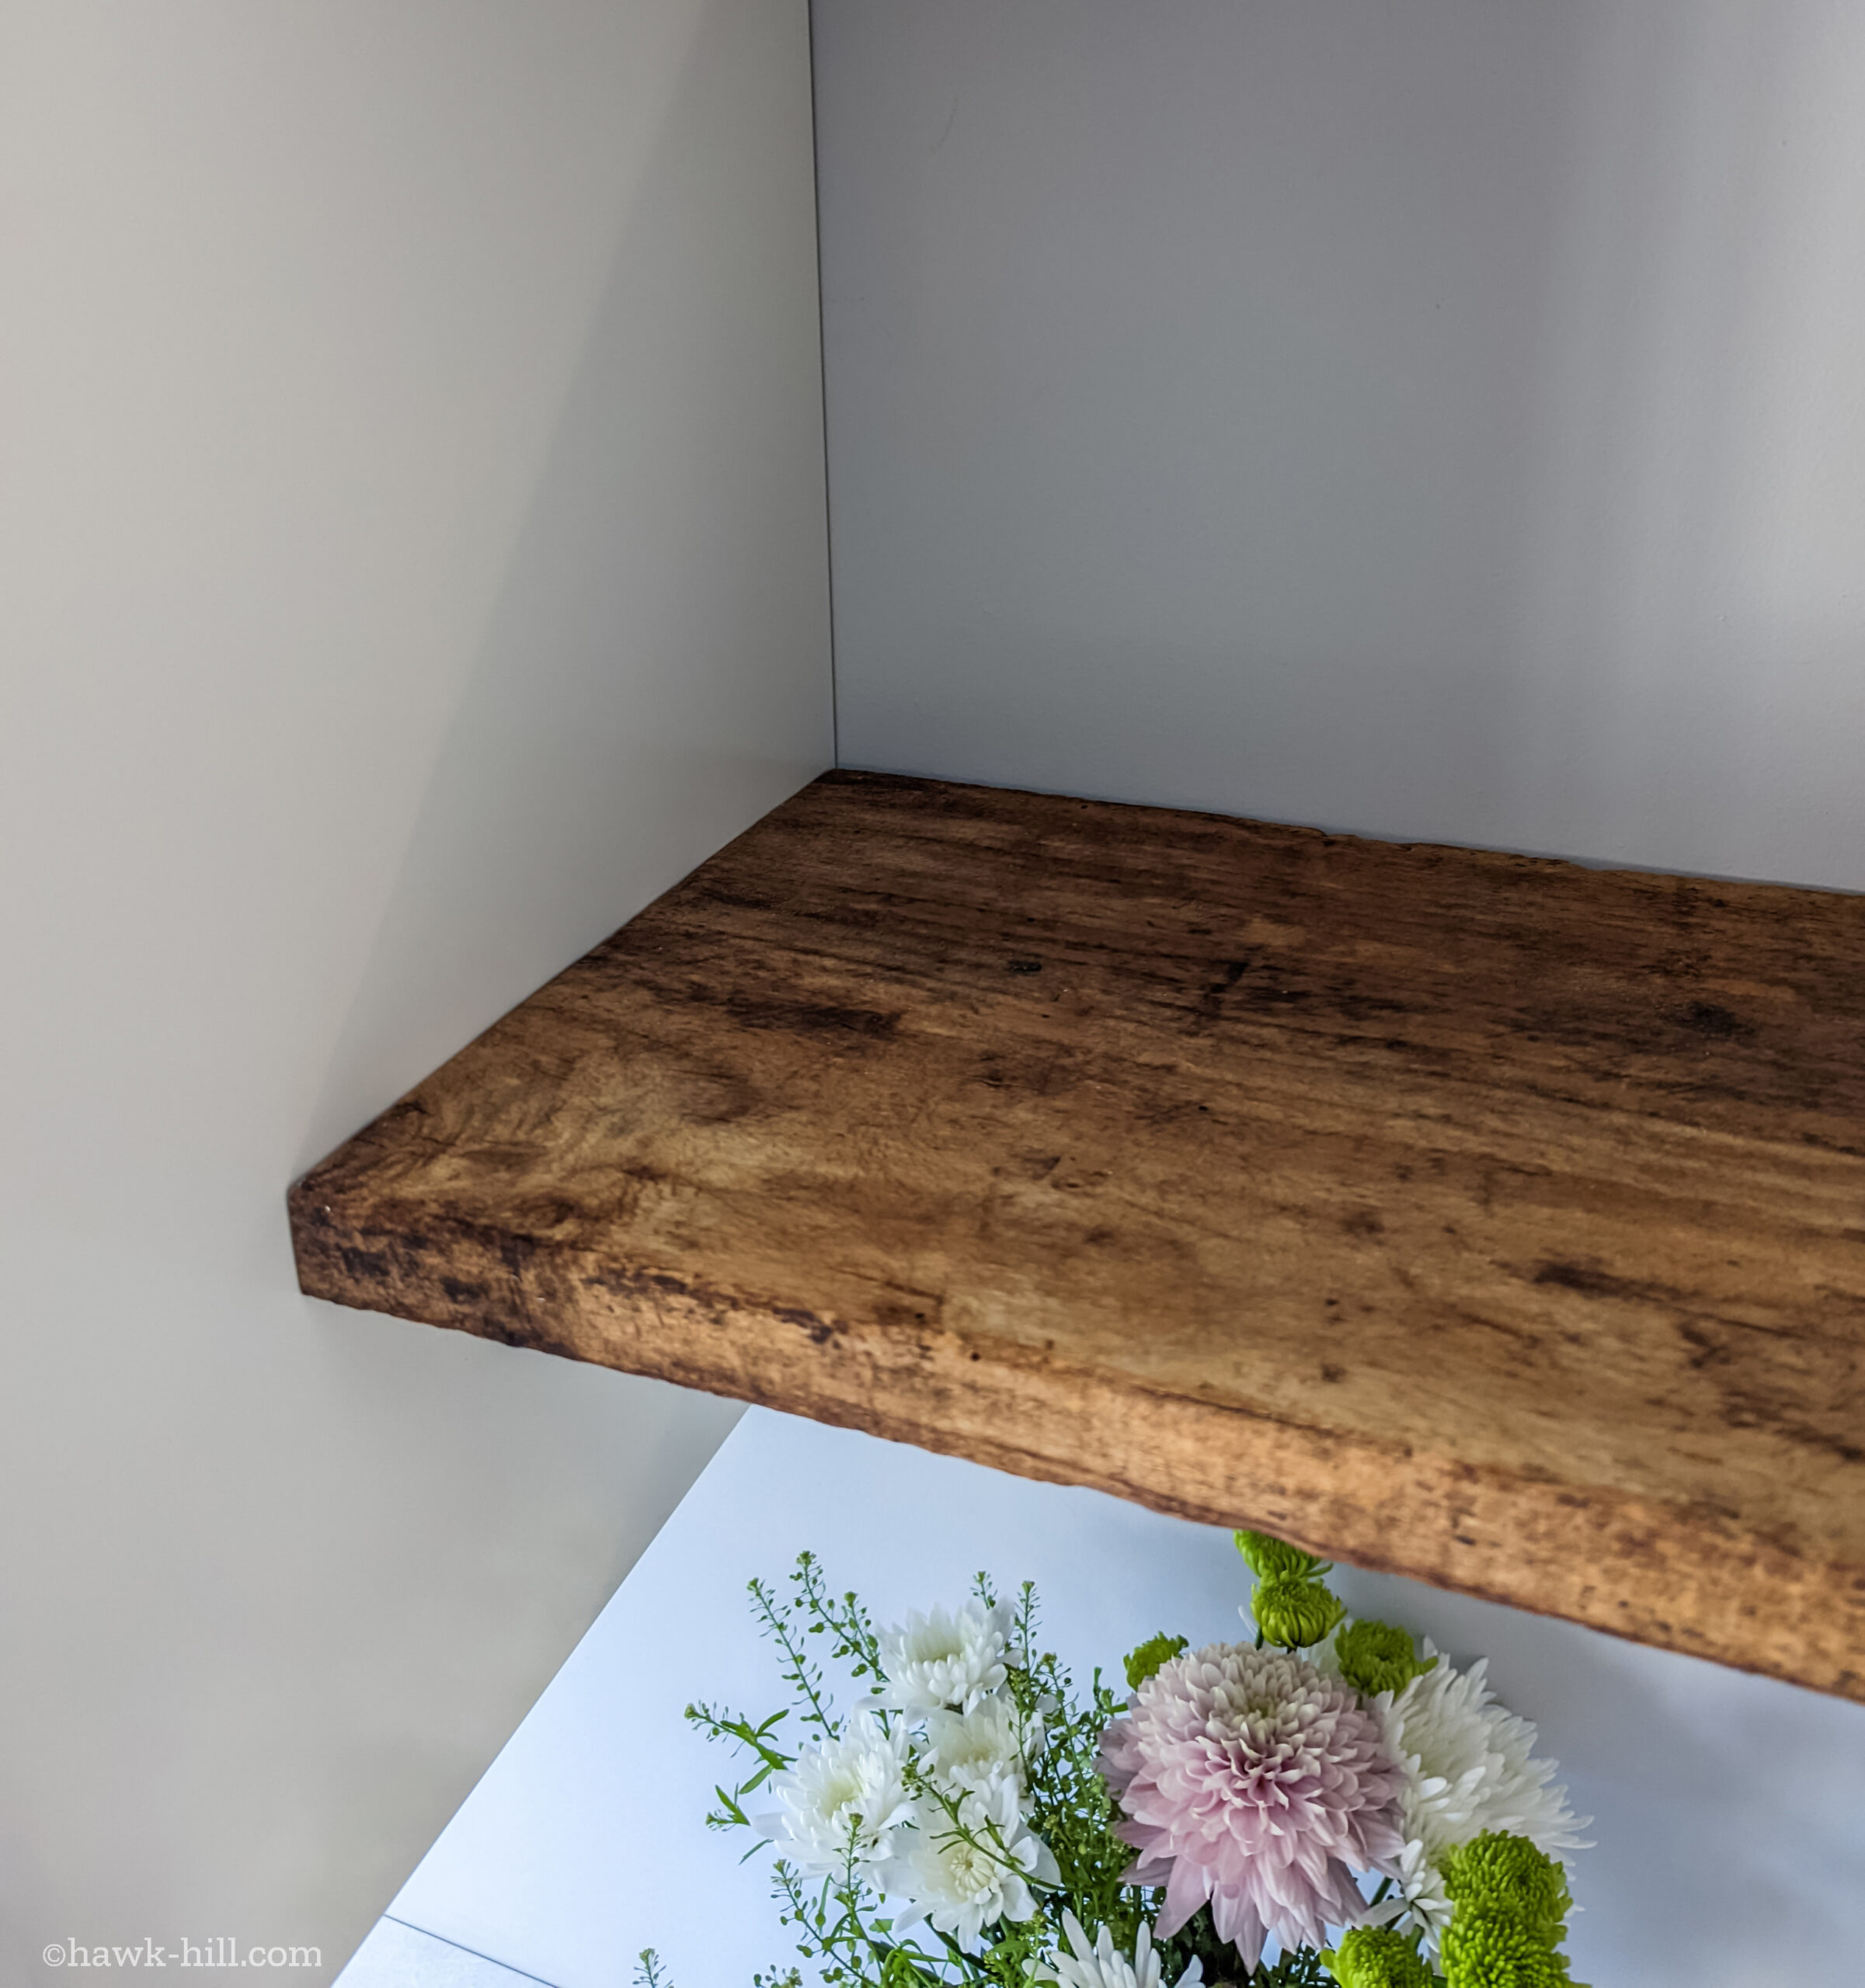 Raw wood Open kitchen shelving made from reclaimed floor joists boards.